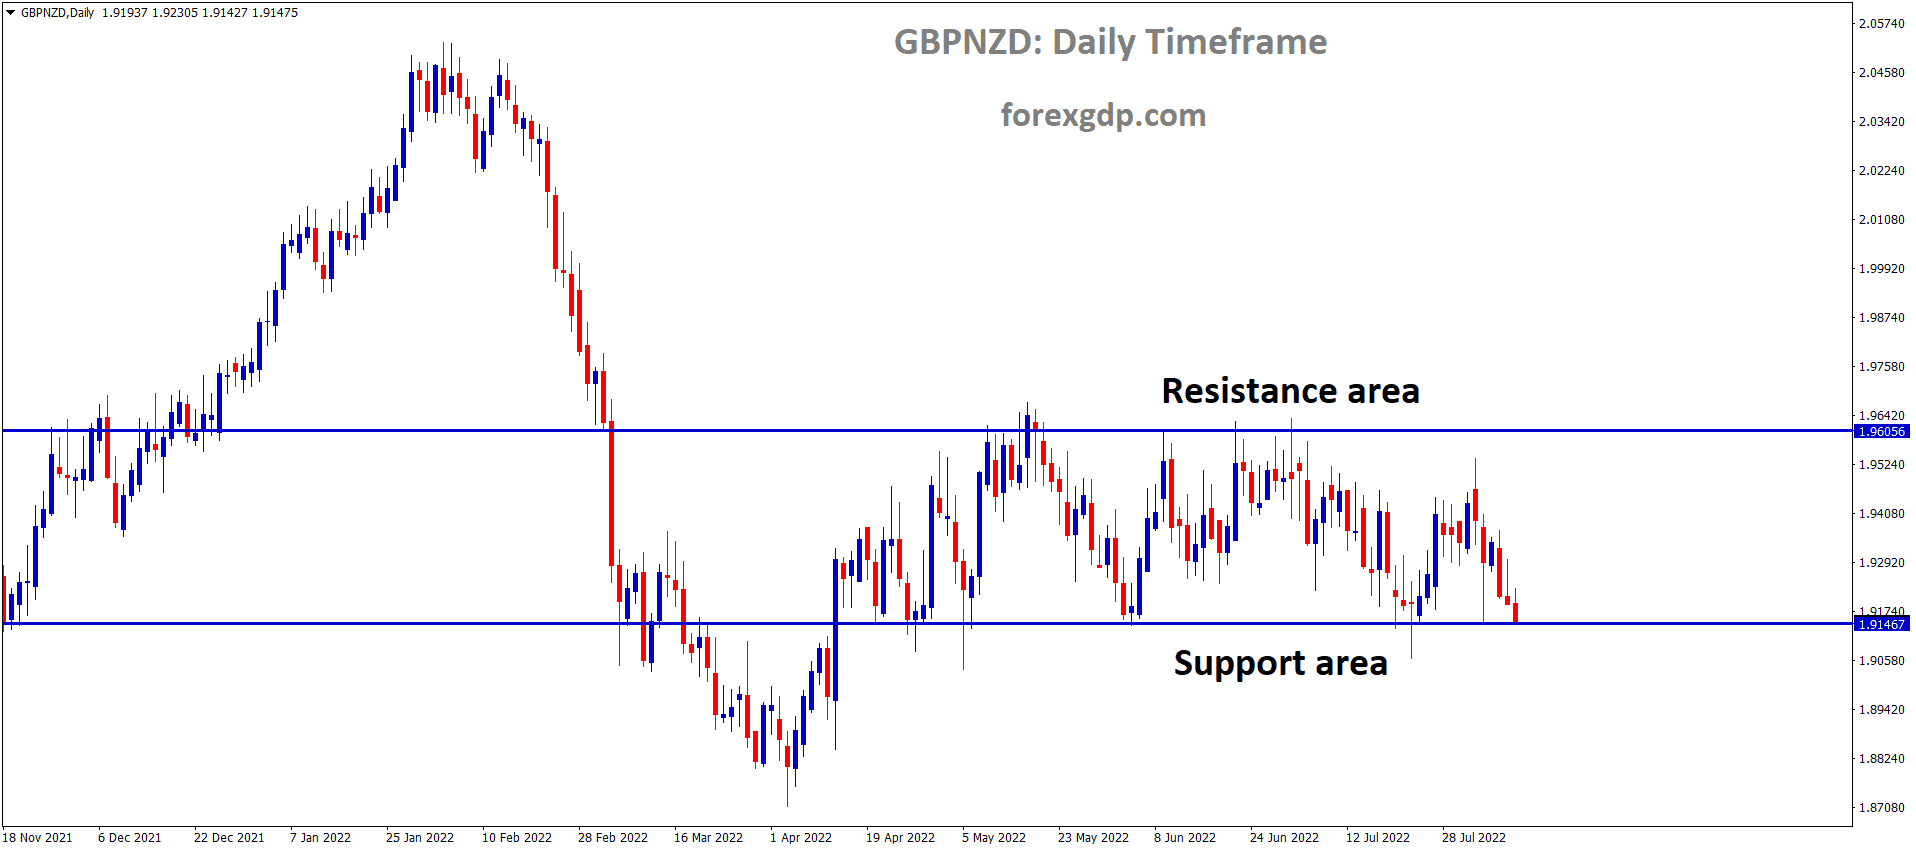 GBPNZD is moving in the Box Pattern and the Market has reached the horizontal support area of the pattern